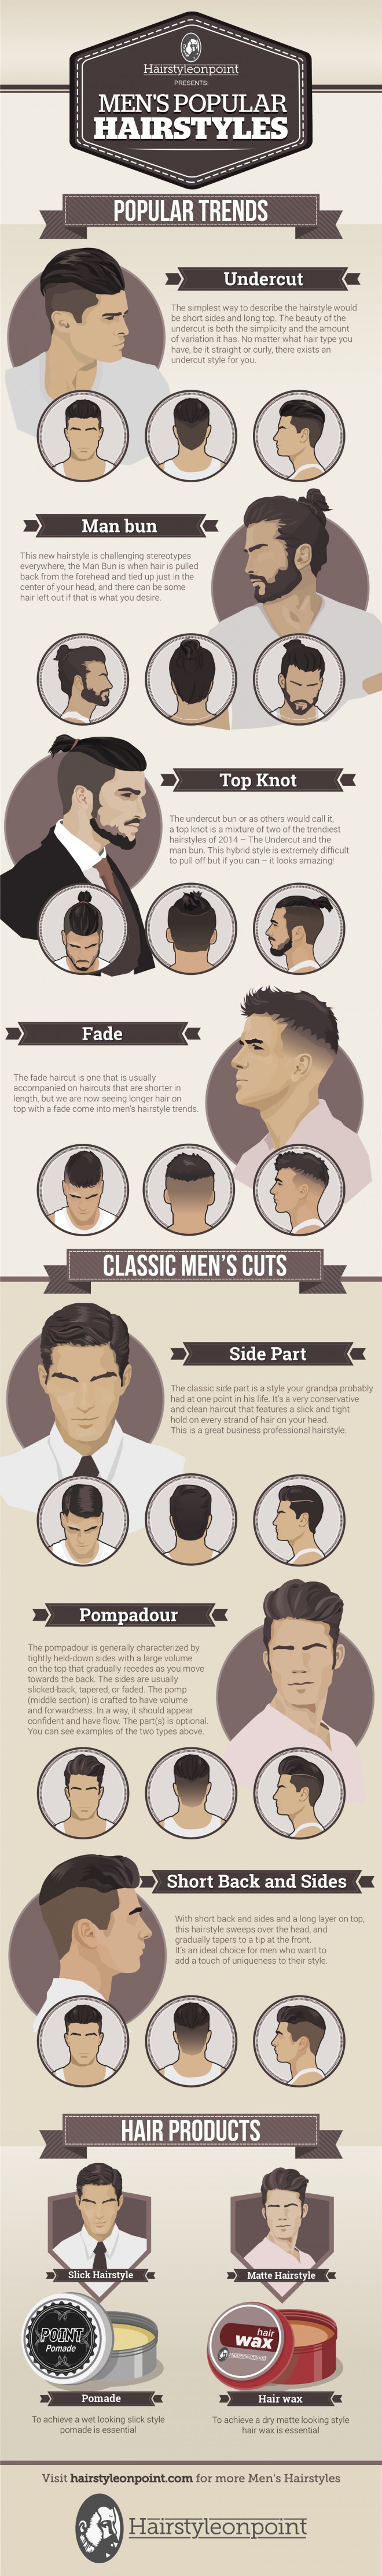 Coiffures pour hommes 2015 / Source : http://hairstyleonpoint.com